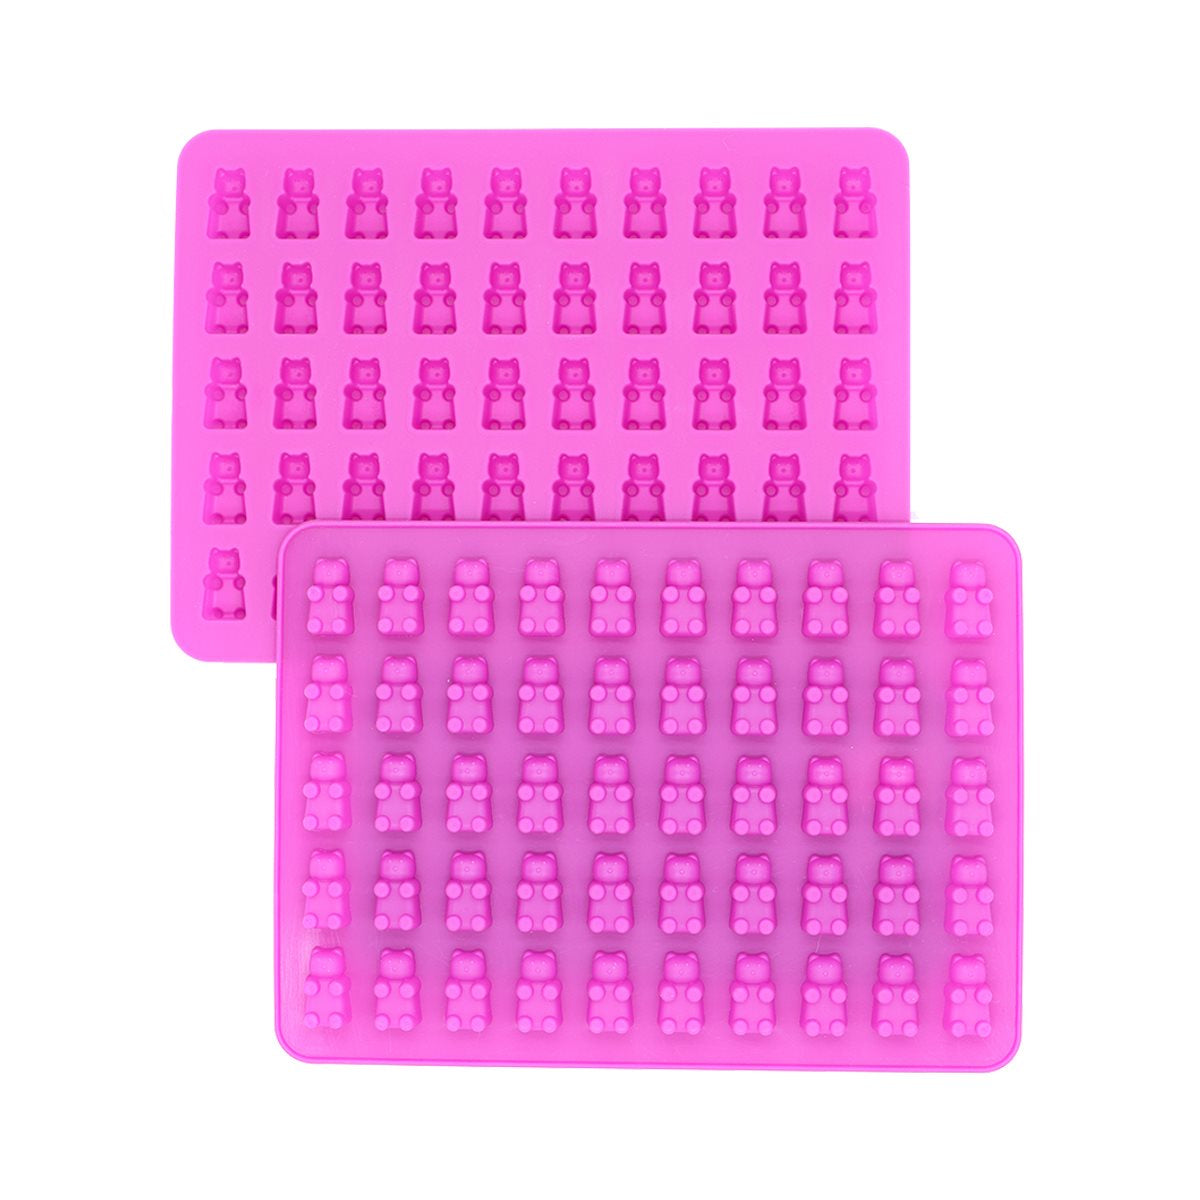 Silicone Mold - Silicone Gummy Candy Molds Ice Cube Trays, Set Of 2  Silicone